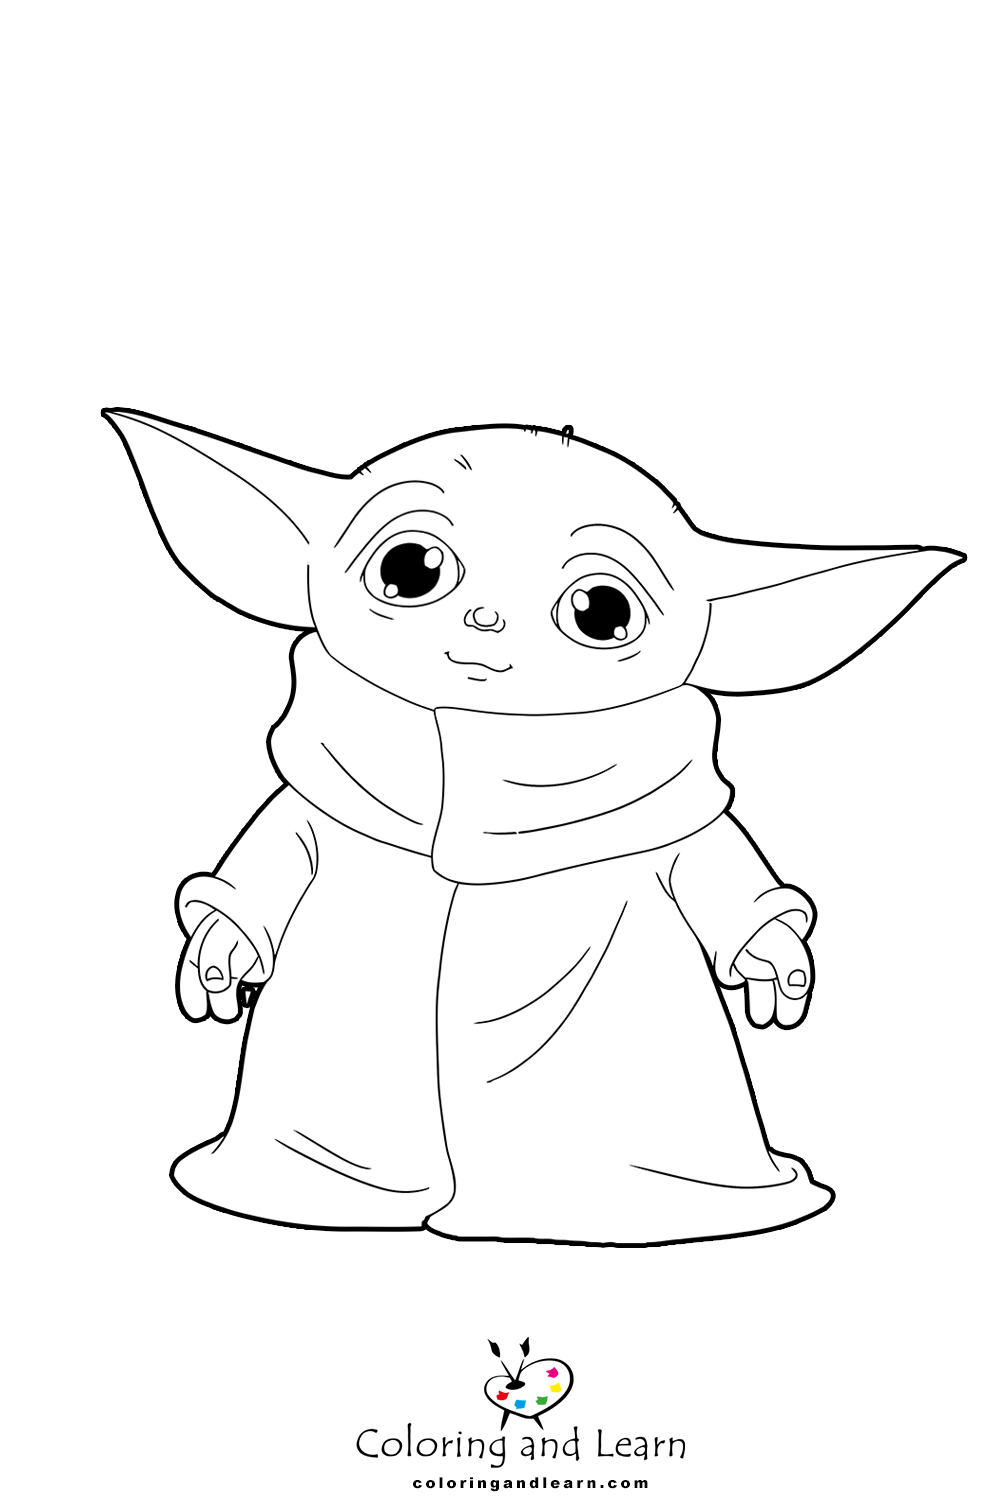 Baby yoda coloring pages